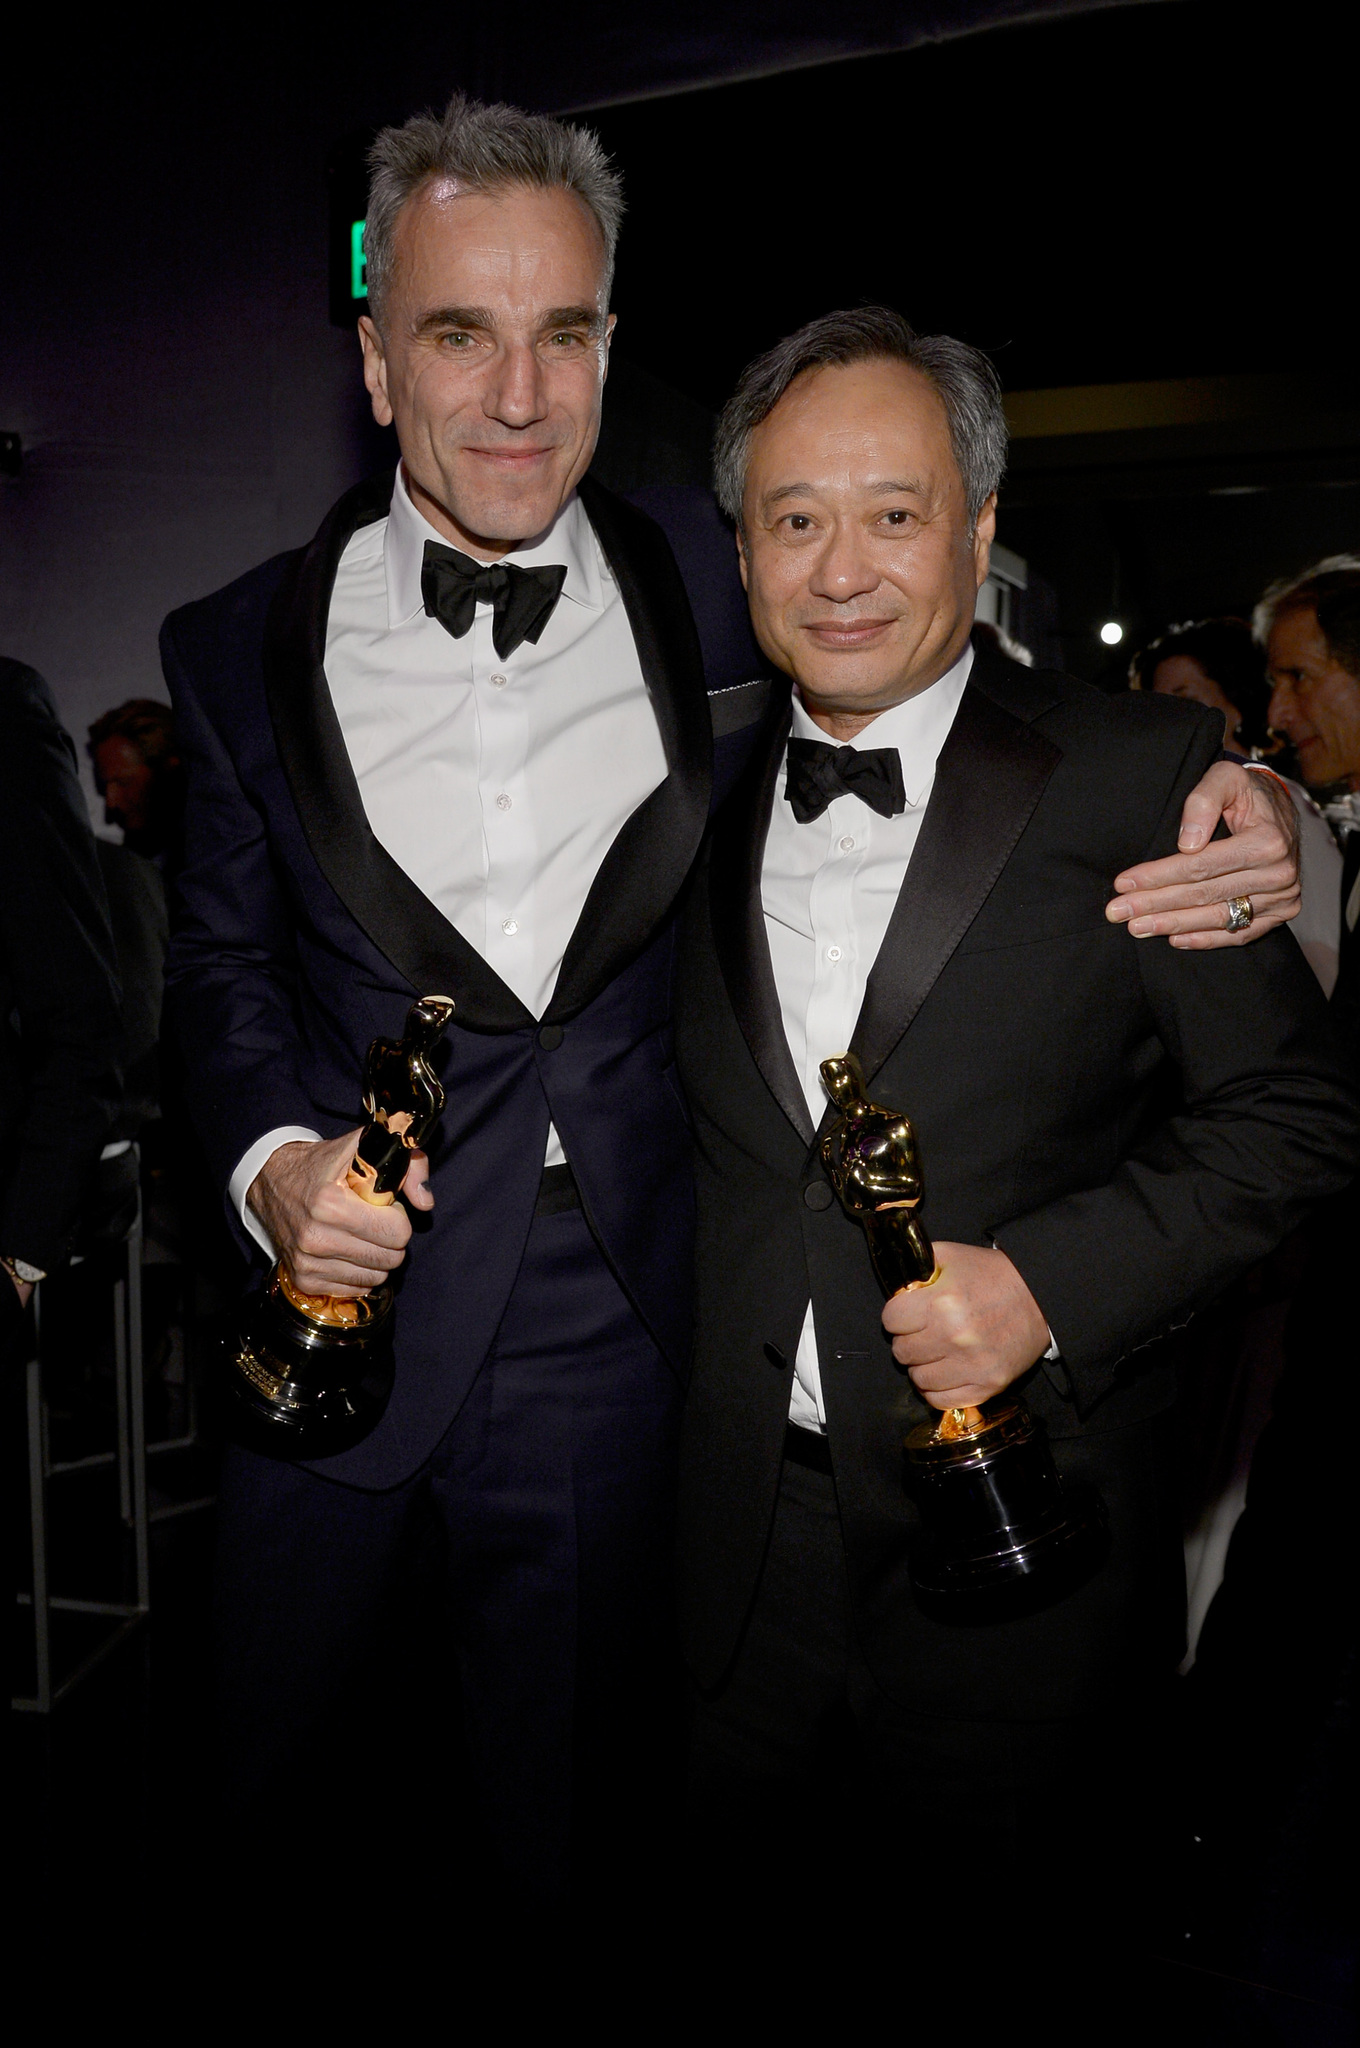 Daniel Day-Lewis and Ang Lee